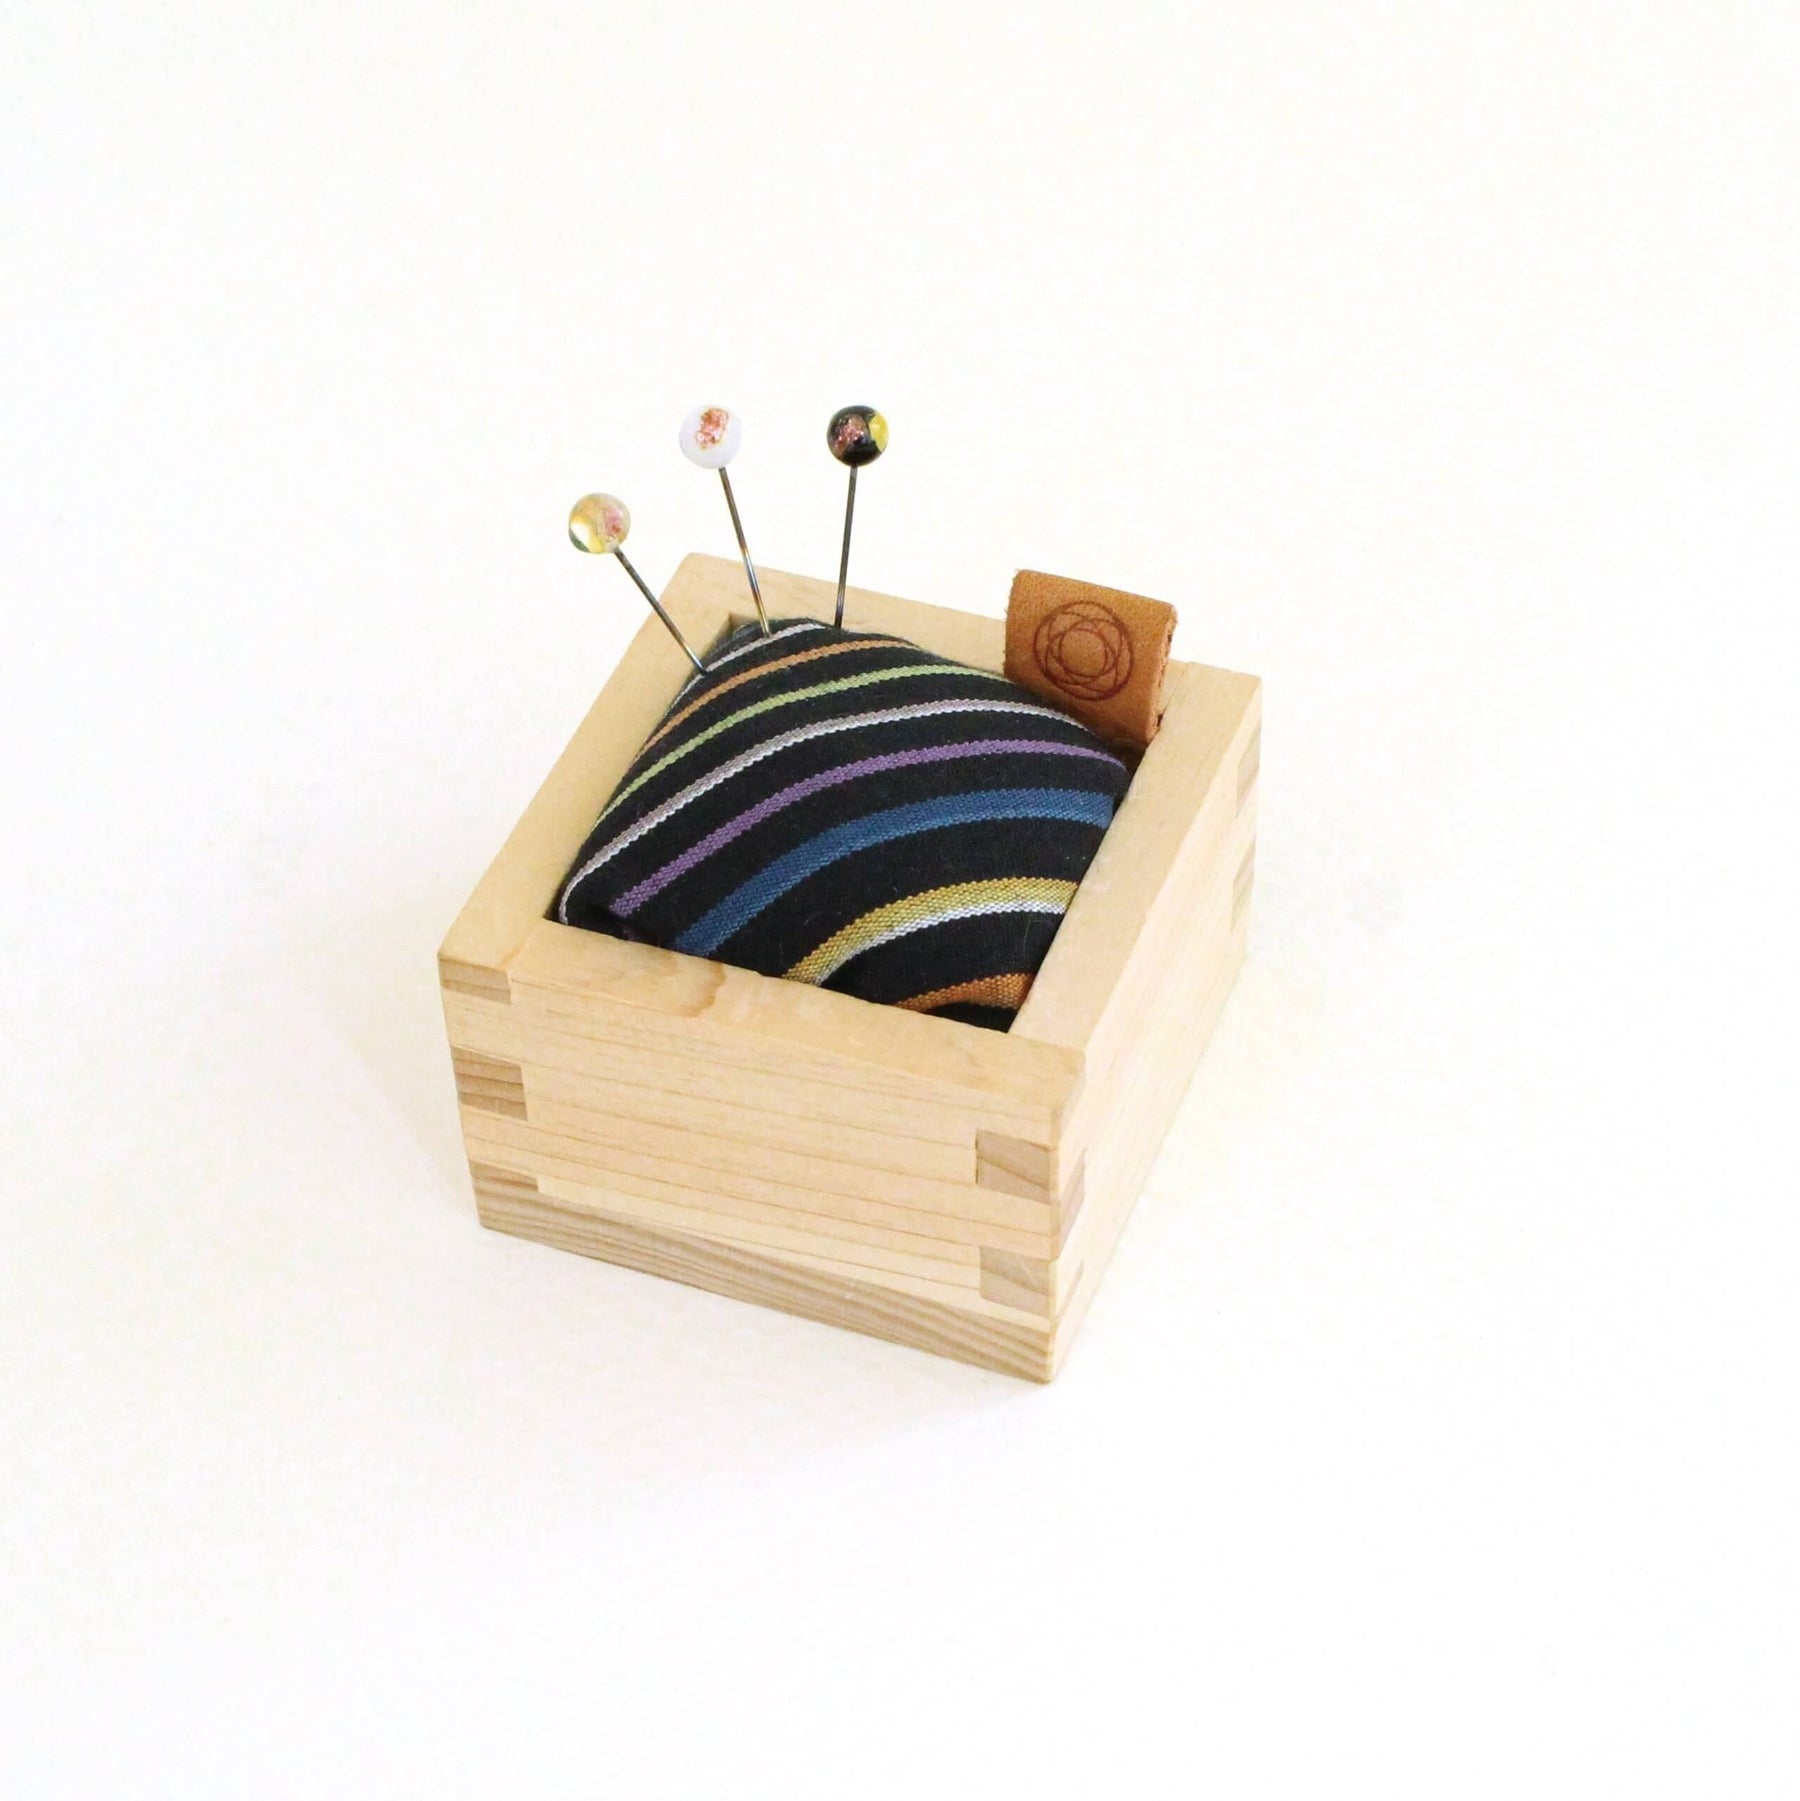 Square pin cushion with wooden base, black and colourful striped fabric with three pins sticking out